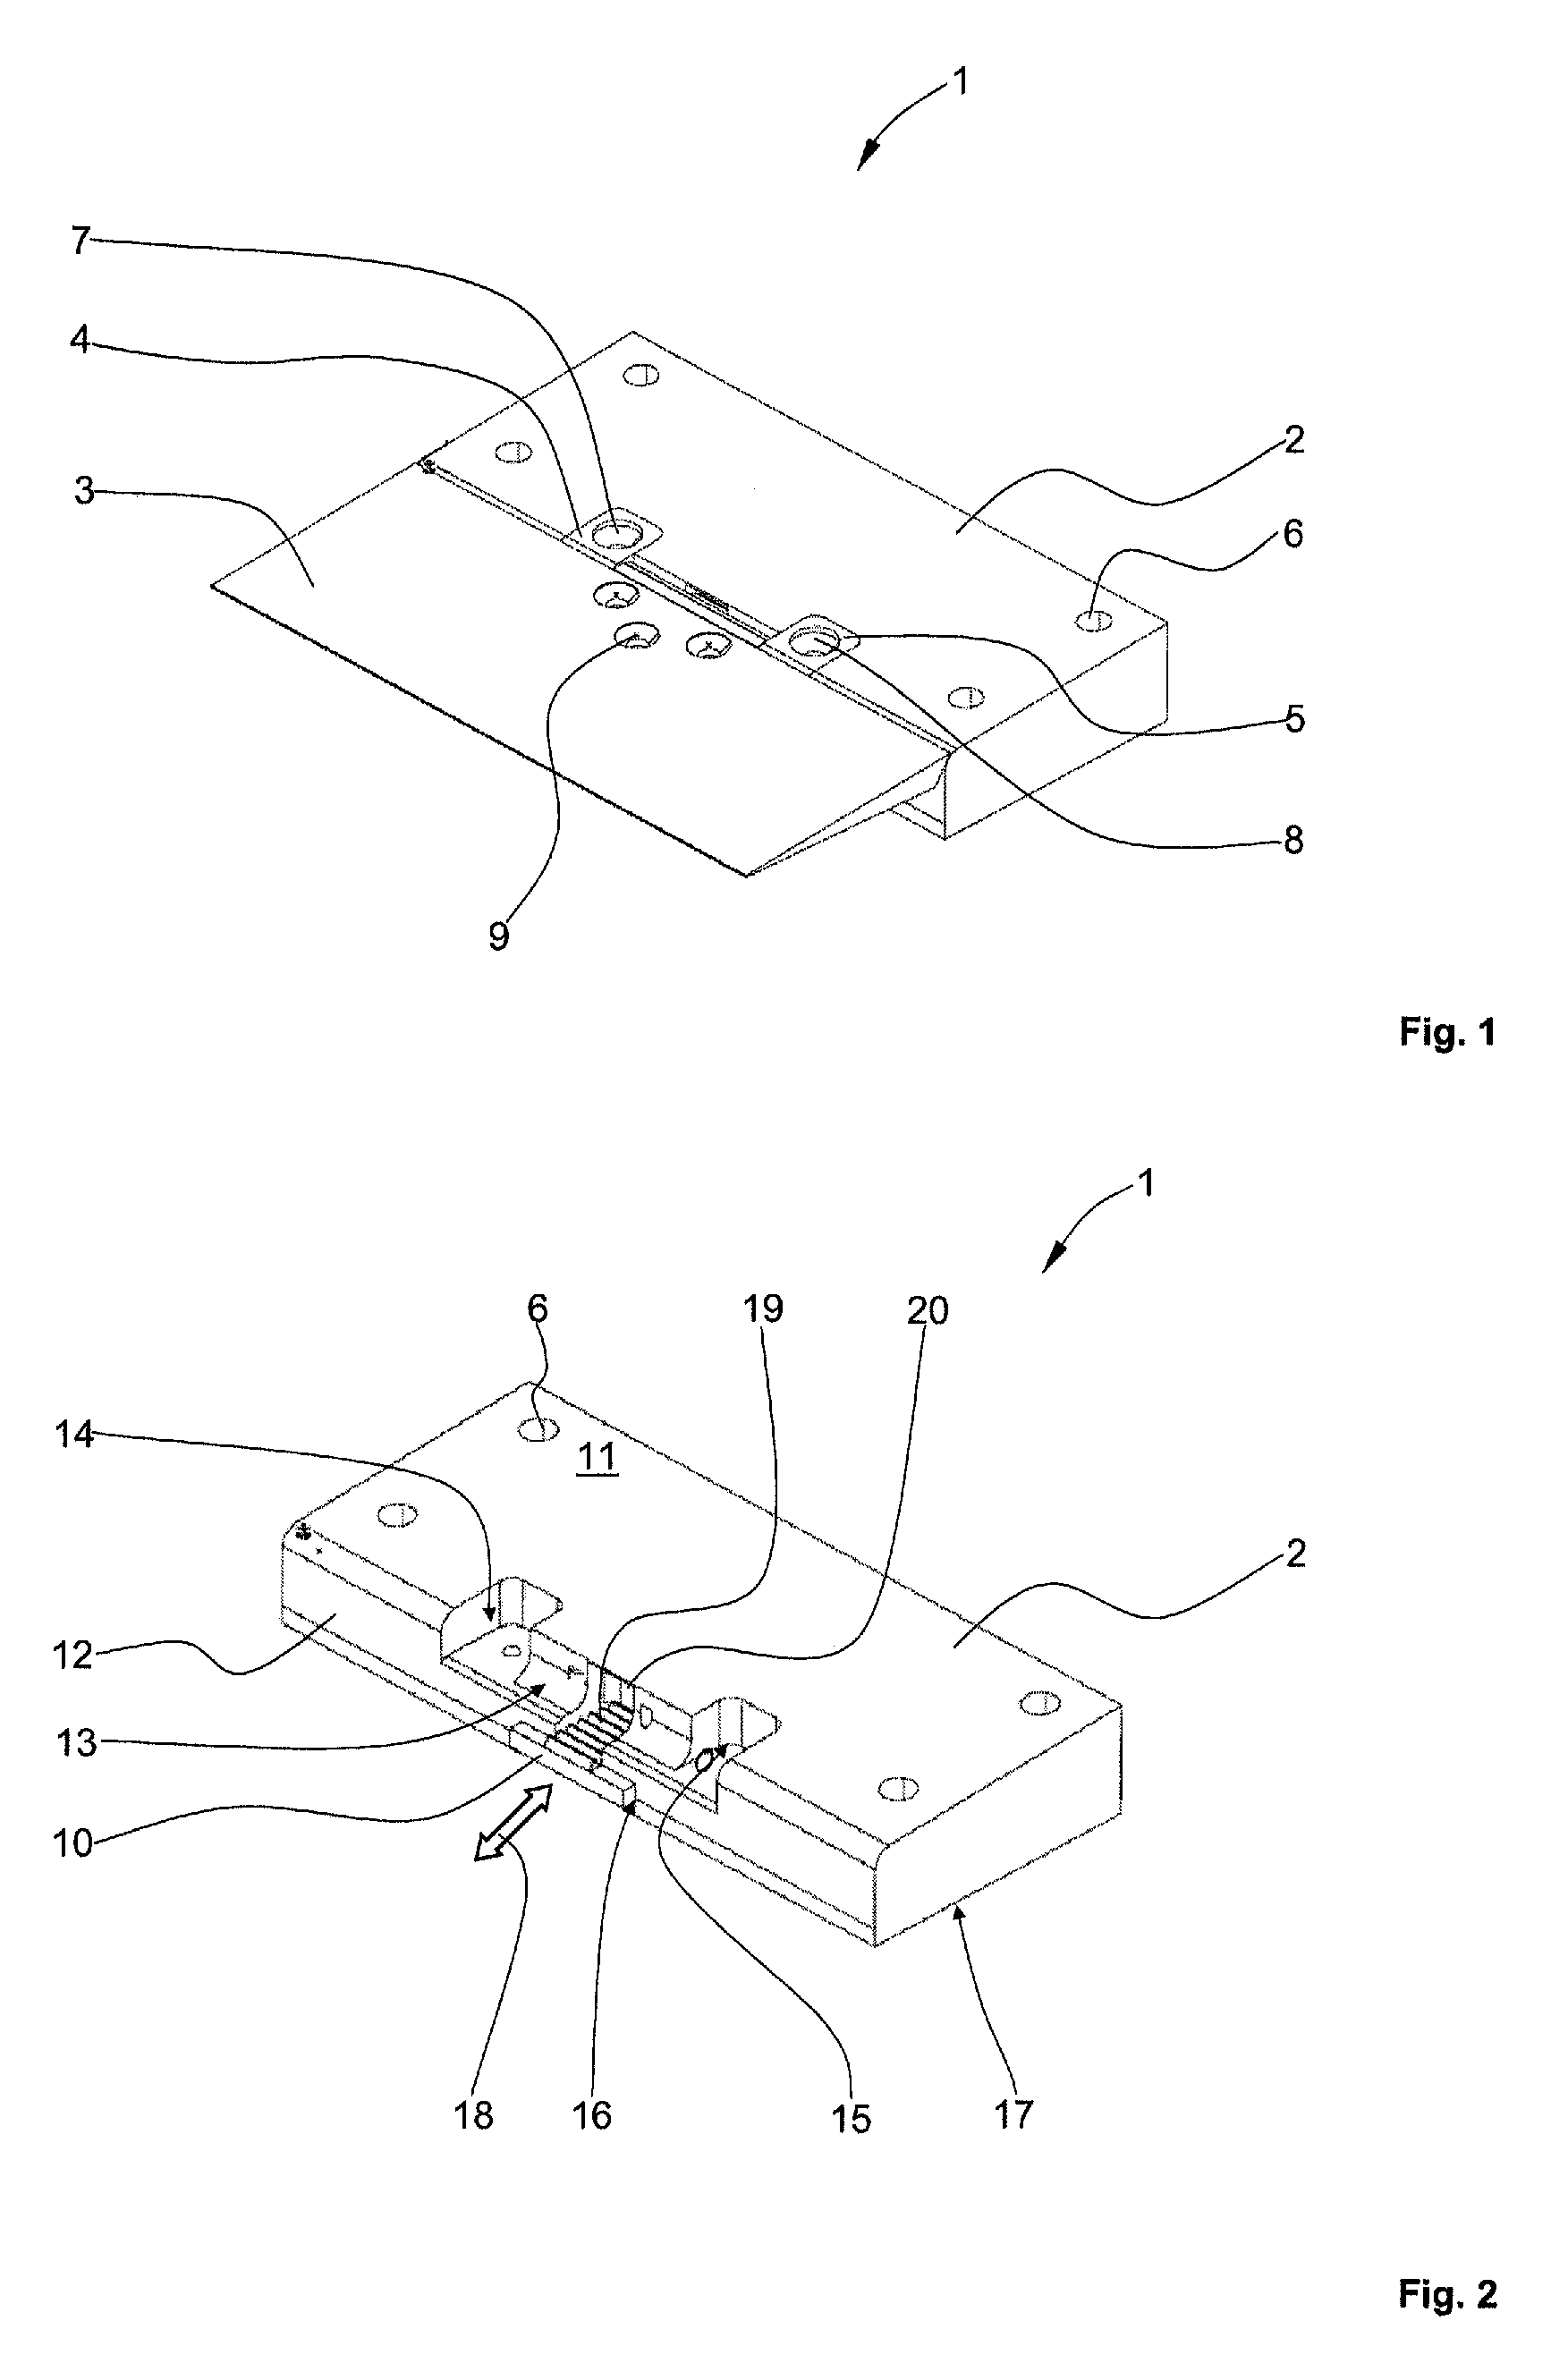 Apparatus for the pivotal fastening of an active surface, in particular a spoiler on a wind tunnel model of an aircraft